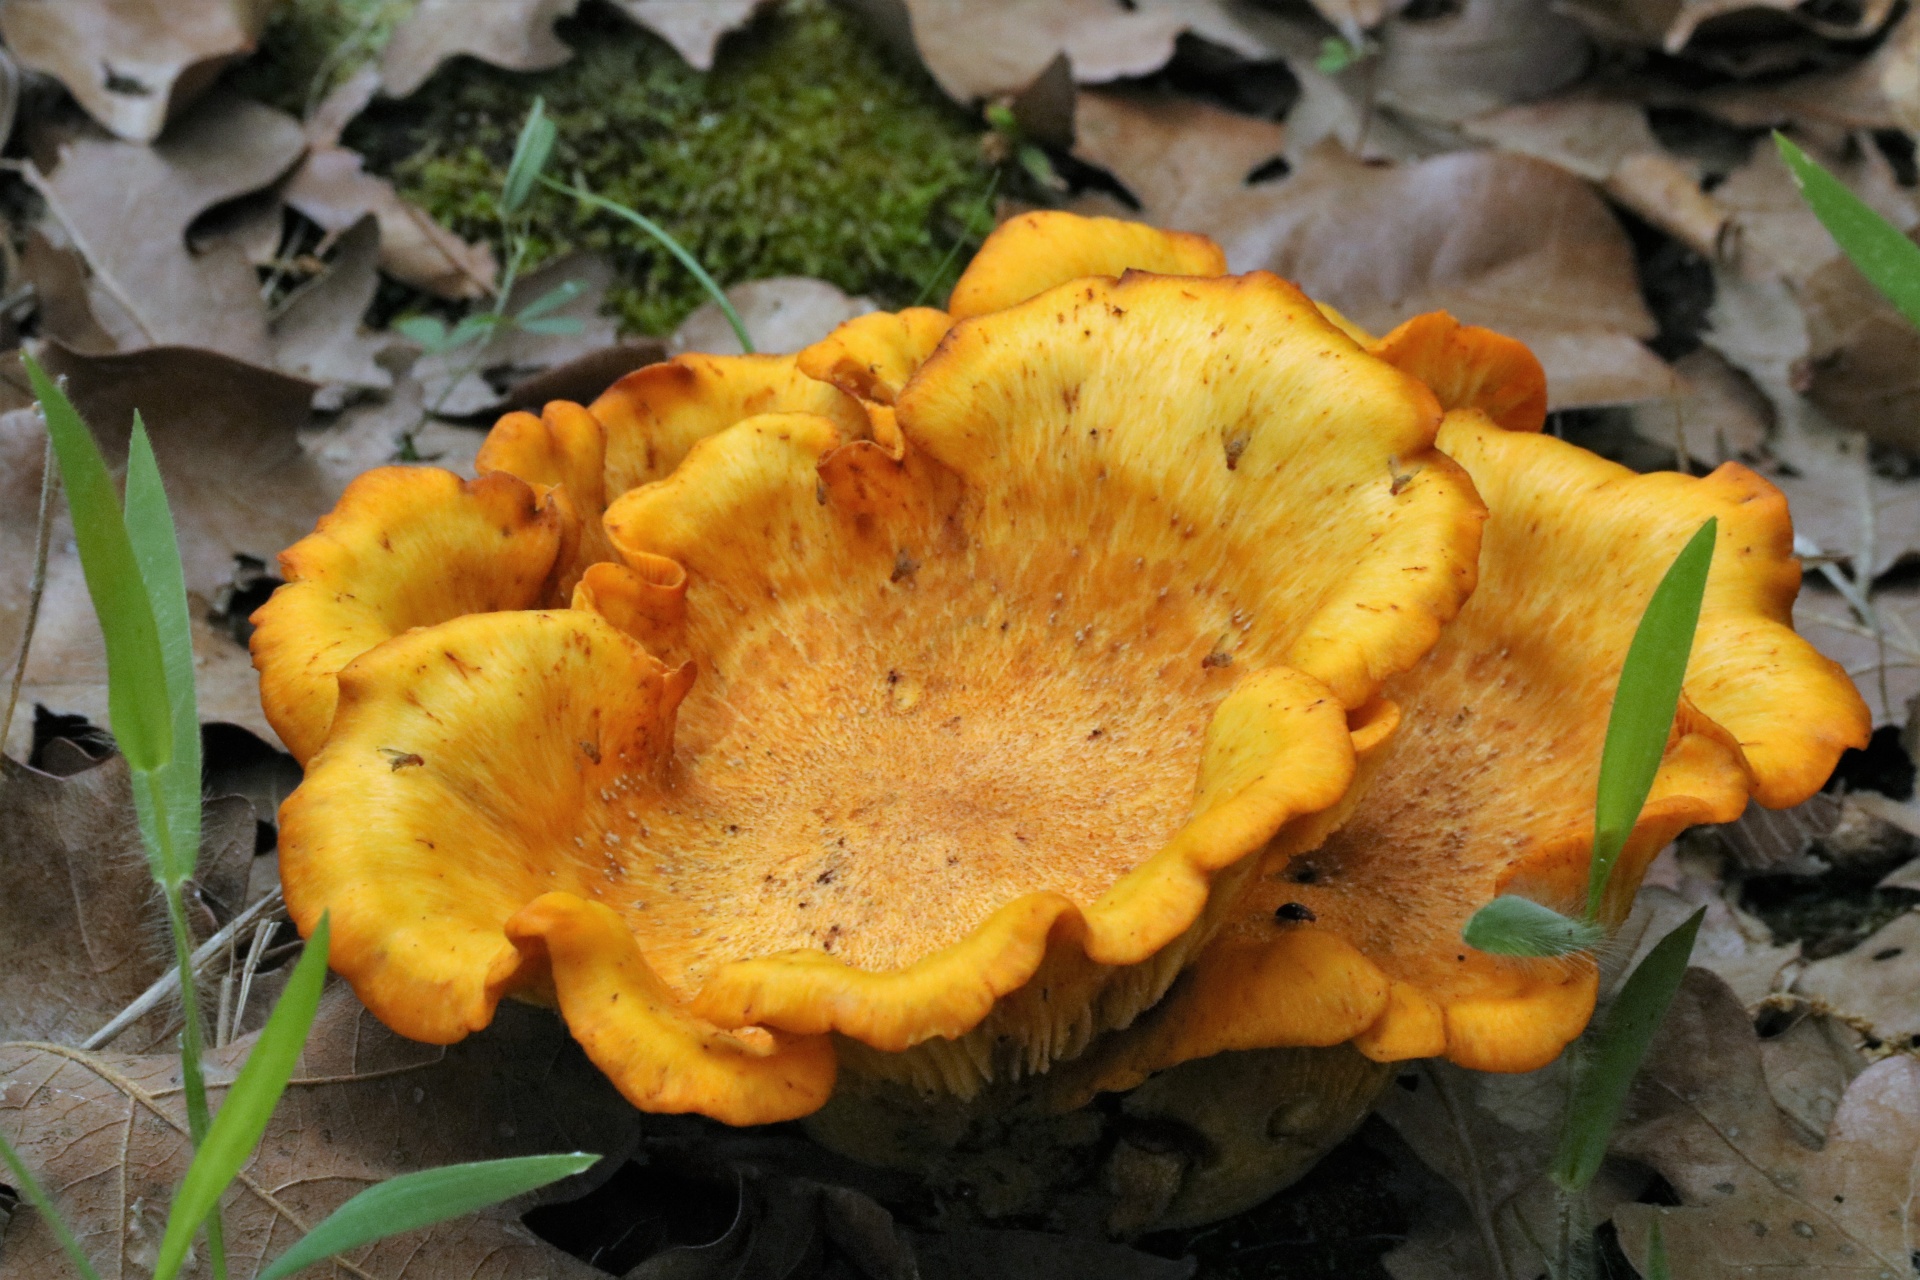 A group of three beautiful gold false chanterelle mushrooms, sometimes called Jack-OLantern mushrooms, growing among green blades of grass, moss and brown autumn leaves.